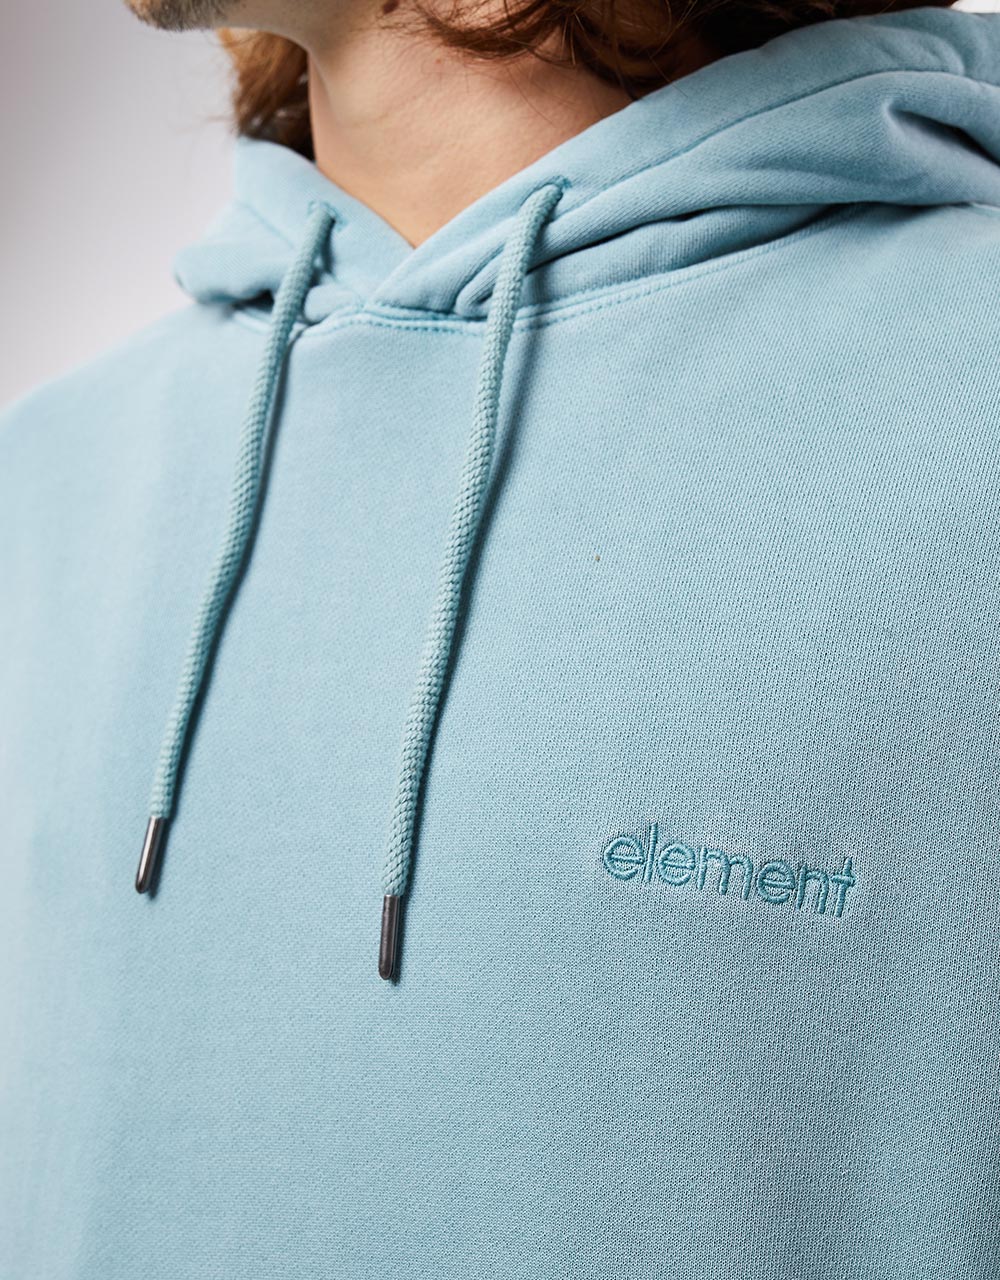 Element Cornell 3.0 Pullover Hoodie - Mineral Blue